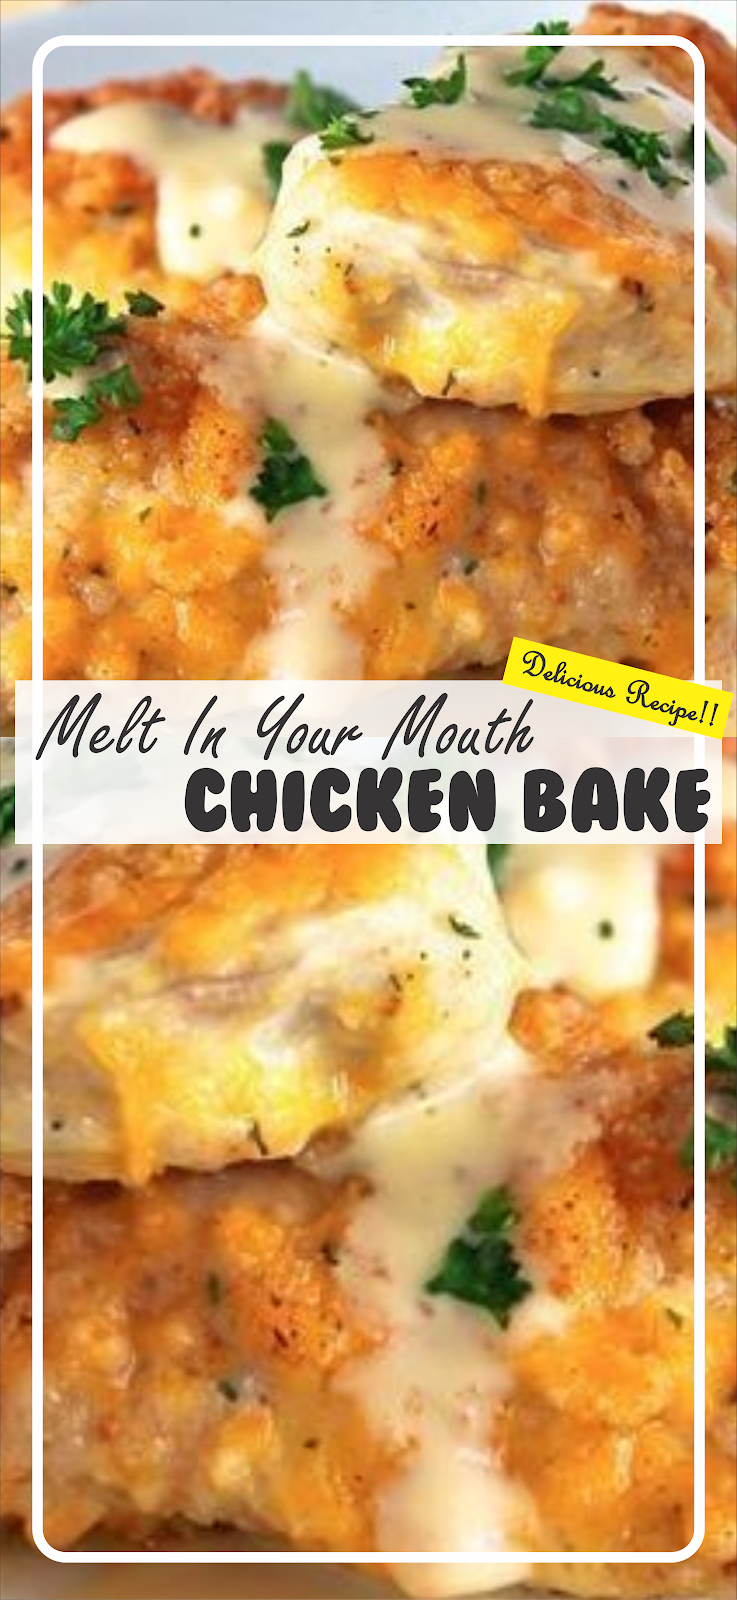 Melt In Your Mouth Chicken Bake | Floats CO